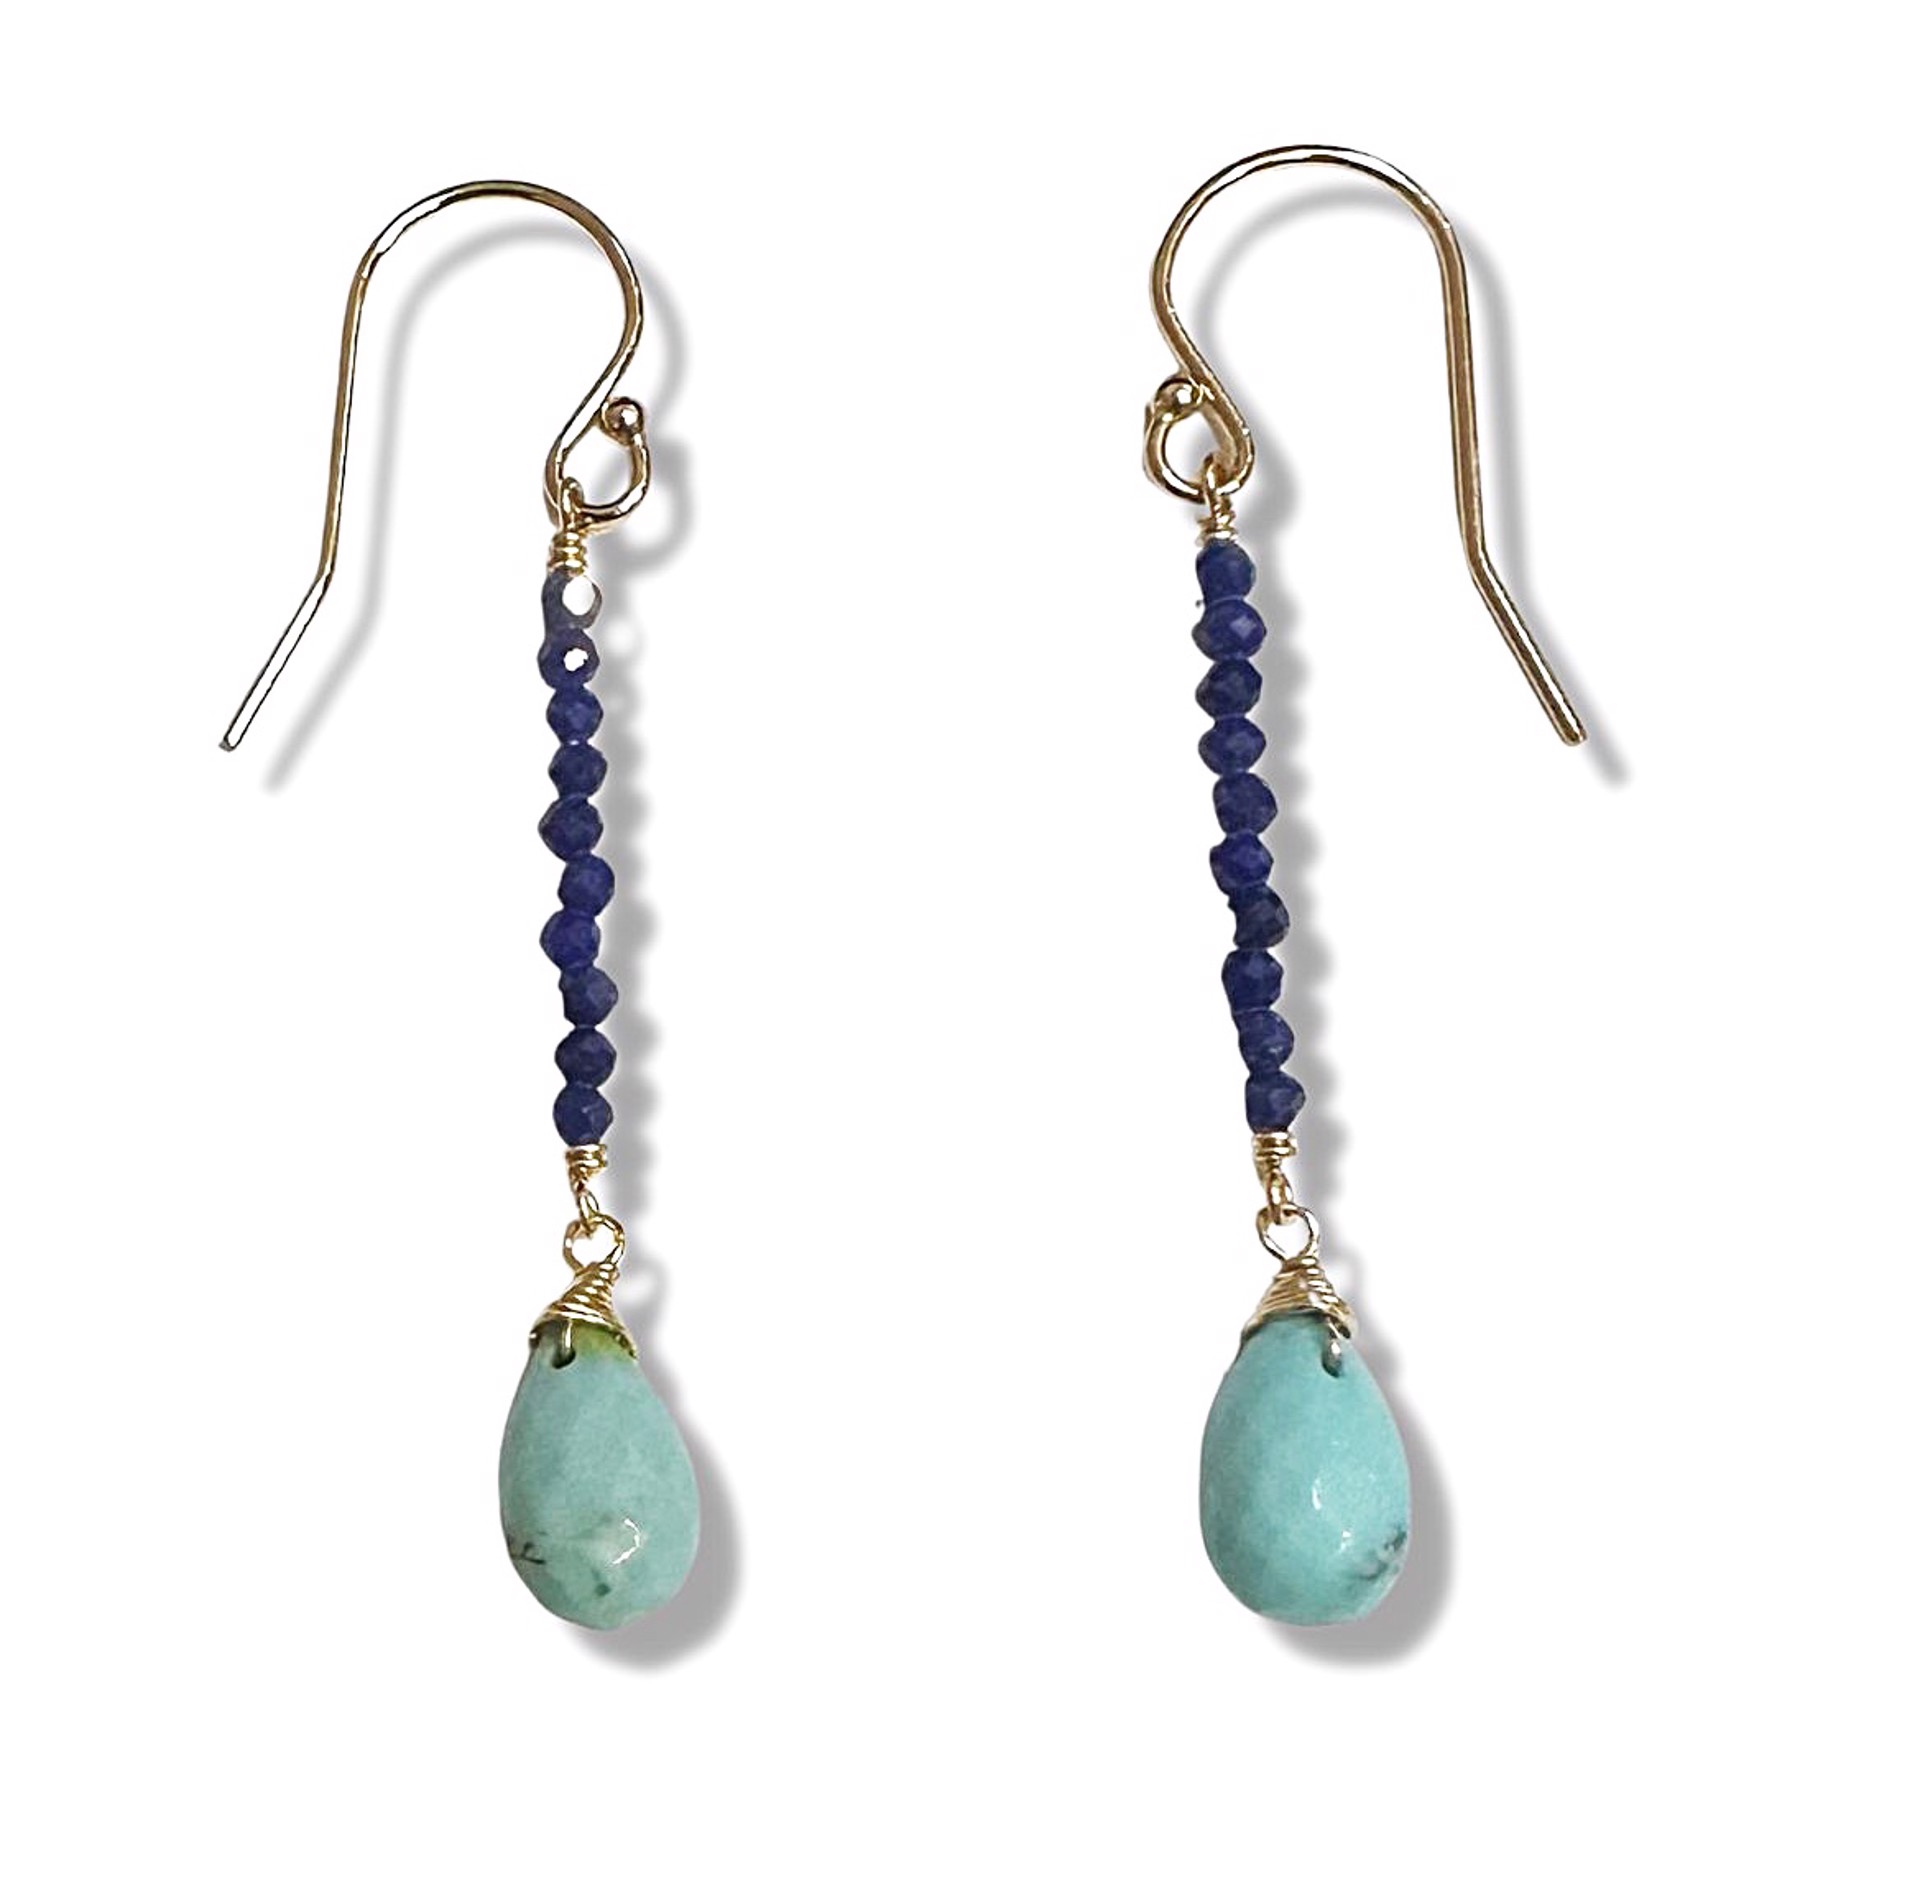 Earrings - Lapis and Turquoise with 14K Gold by Julia Balestracci